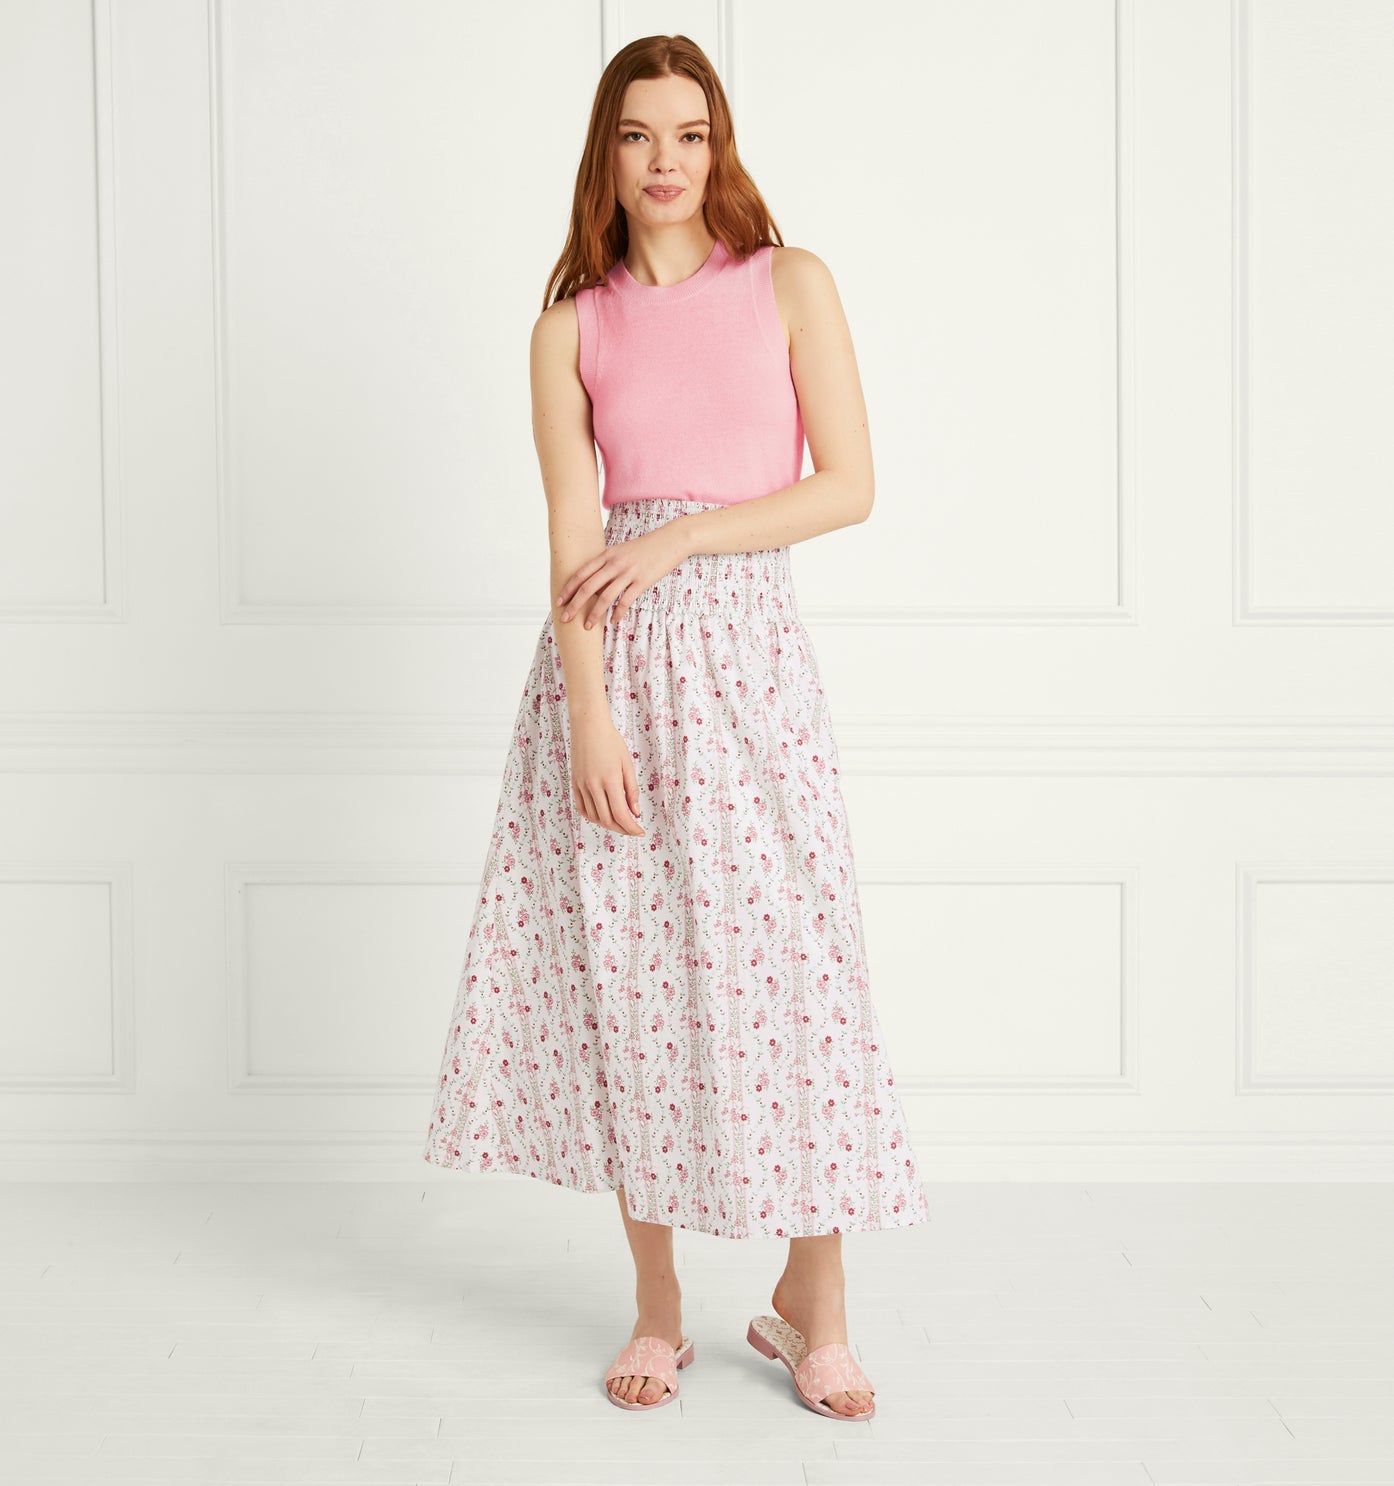 model in white and pink floral print skirt